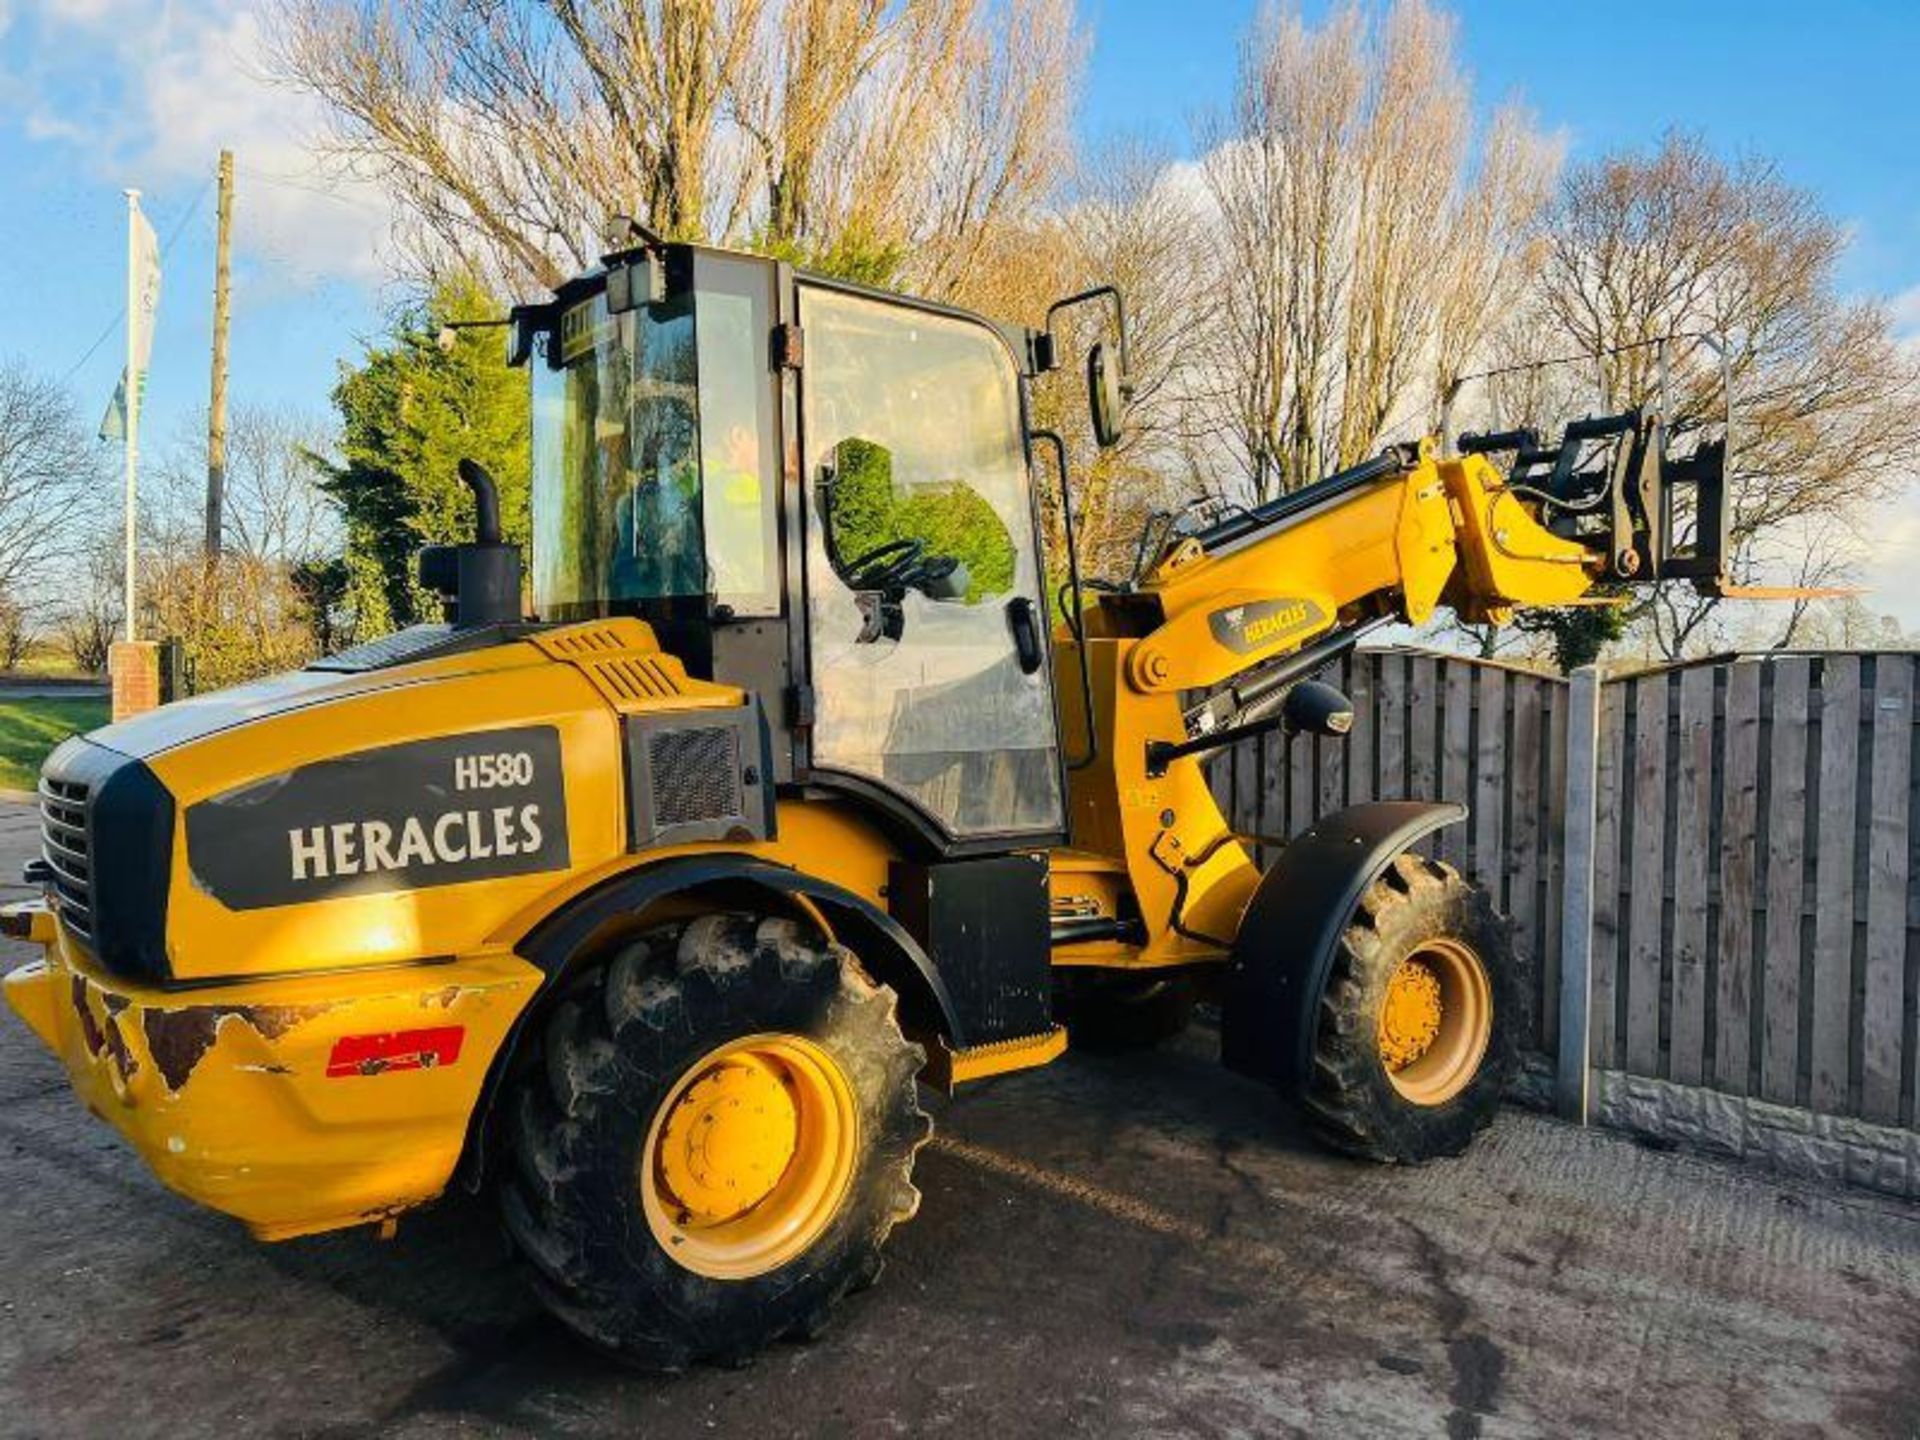 HERACLES H580 4WD TELEHANDLER * YEAR 2019 * C/W QUICK HITCH & PALLET TINES - Image 10 of 14